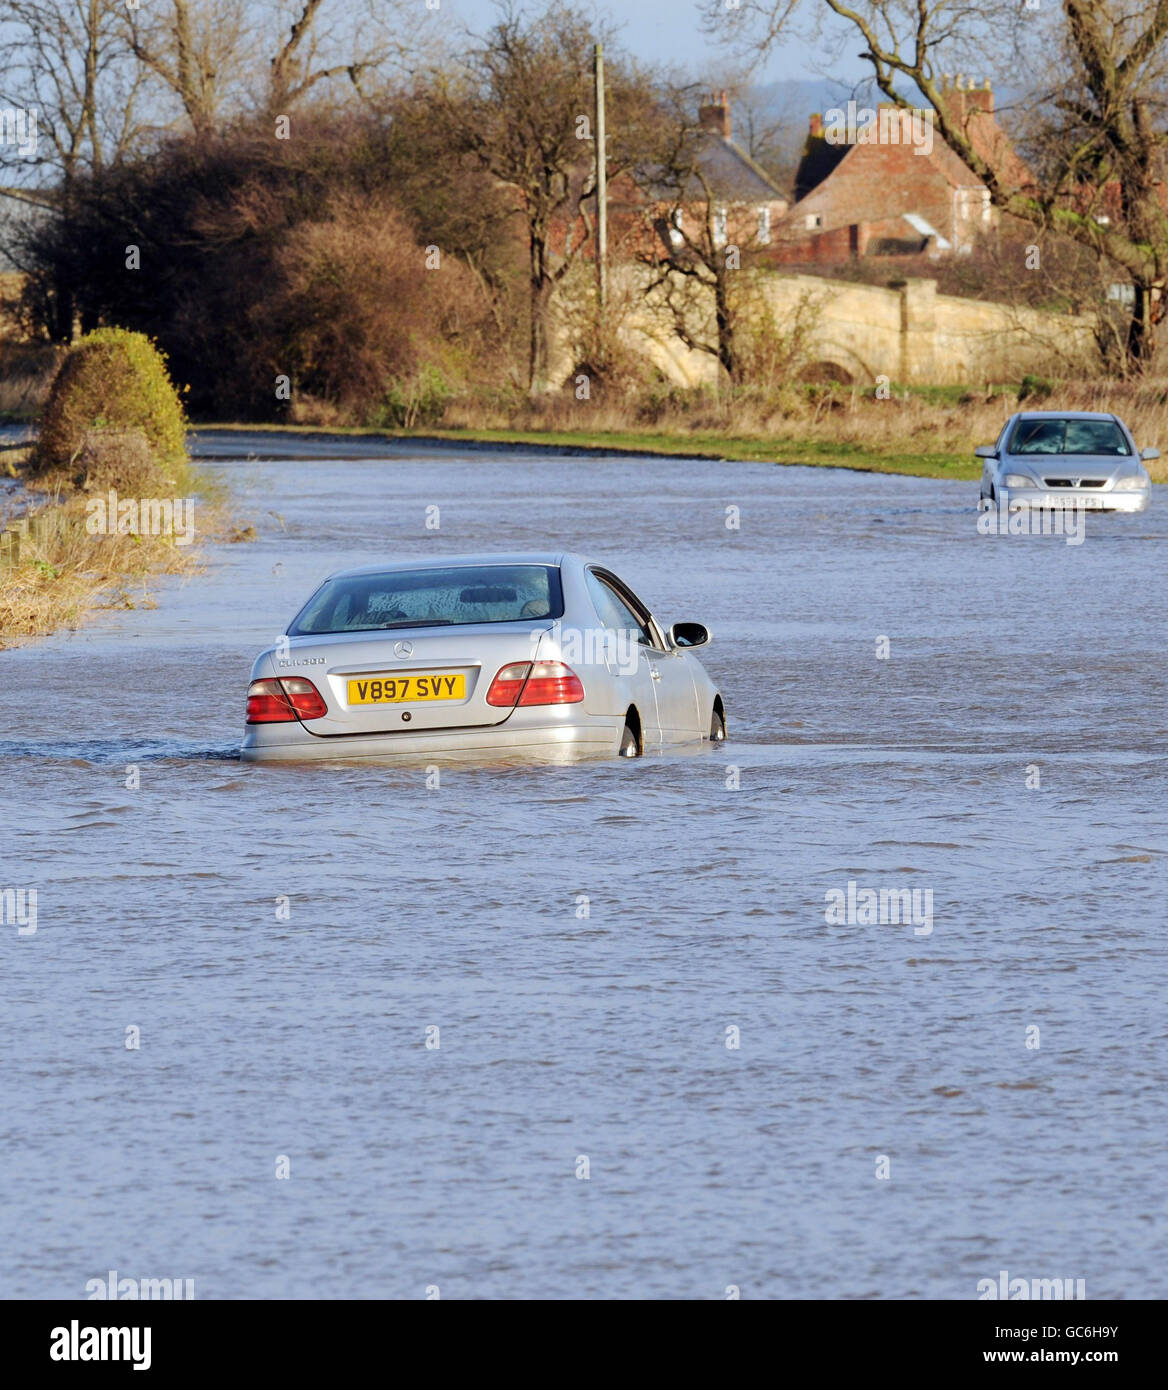 Floodwaters still affecting many parts of the UK today as rising river levels in North Yorkshire near Northallerton leave abandoned vehicles marooned on the road. Stock Photo